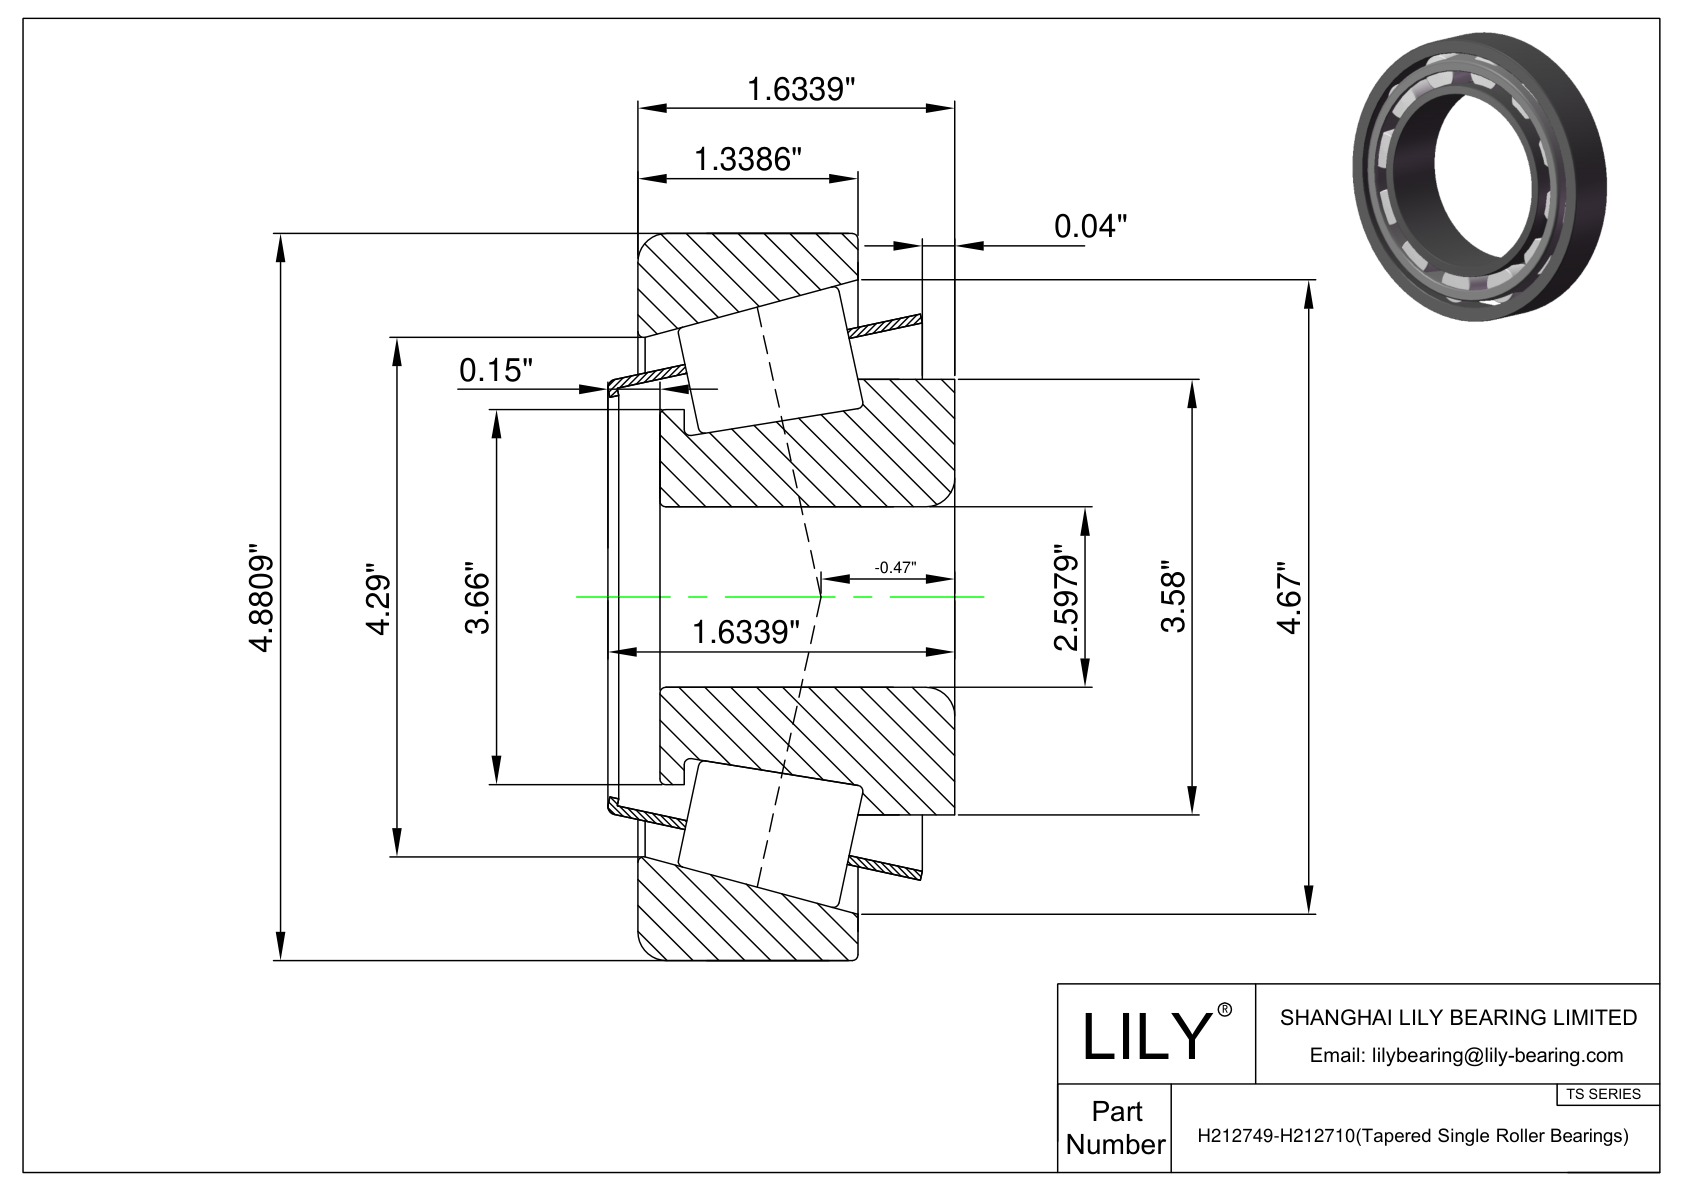 H212749-H212710 TS (Tapered Single Roller Bearings) (Imperial) cad drawing